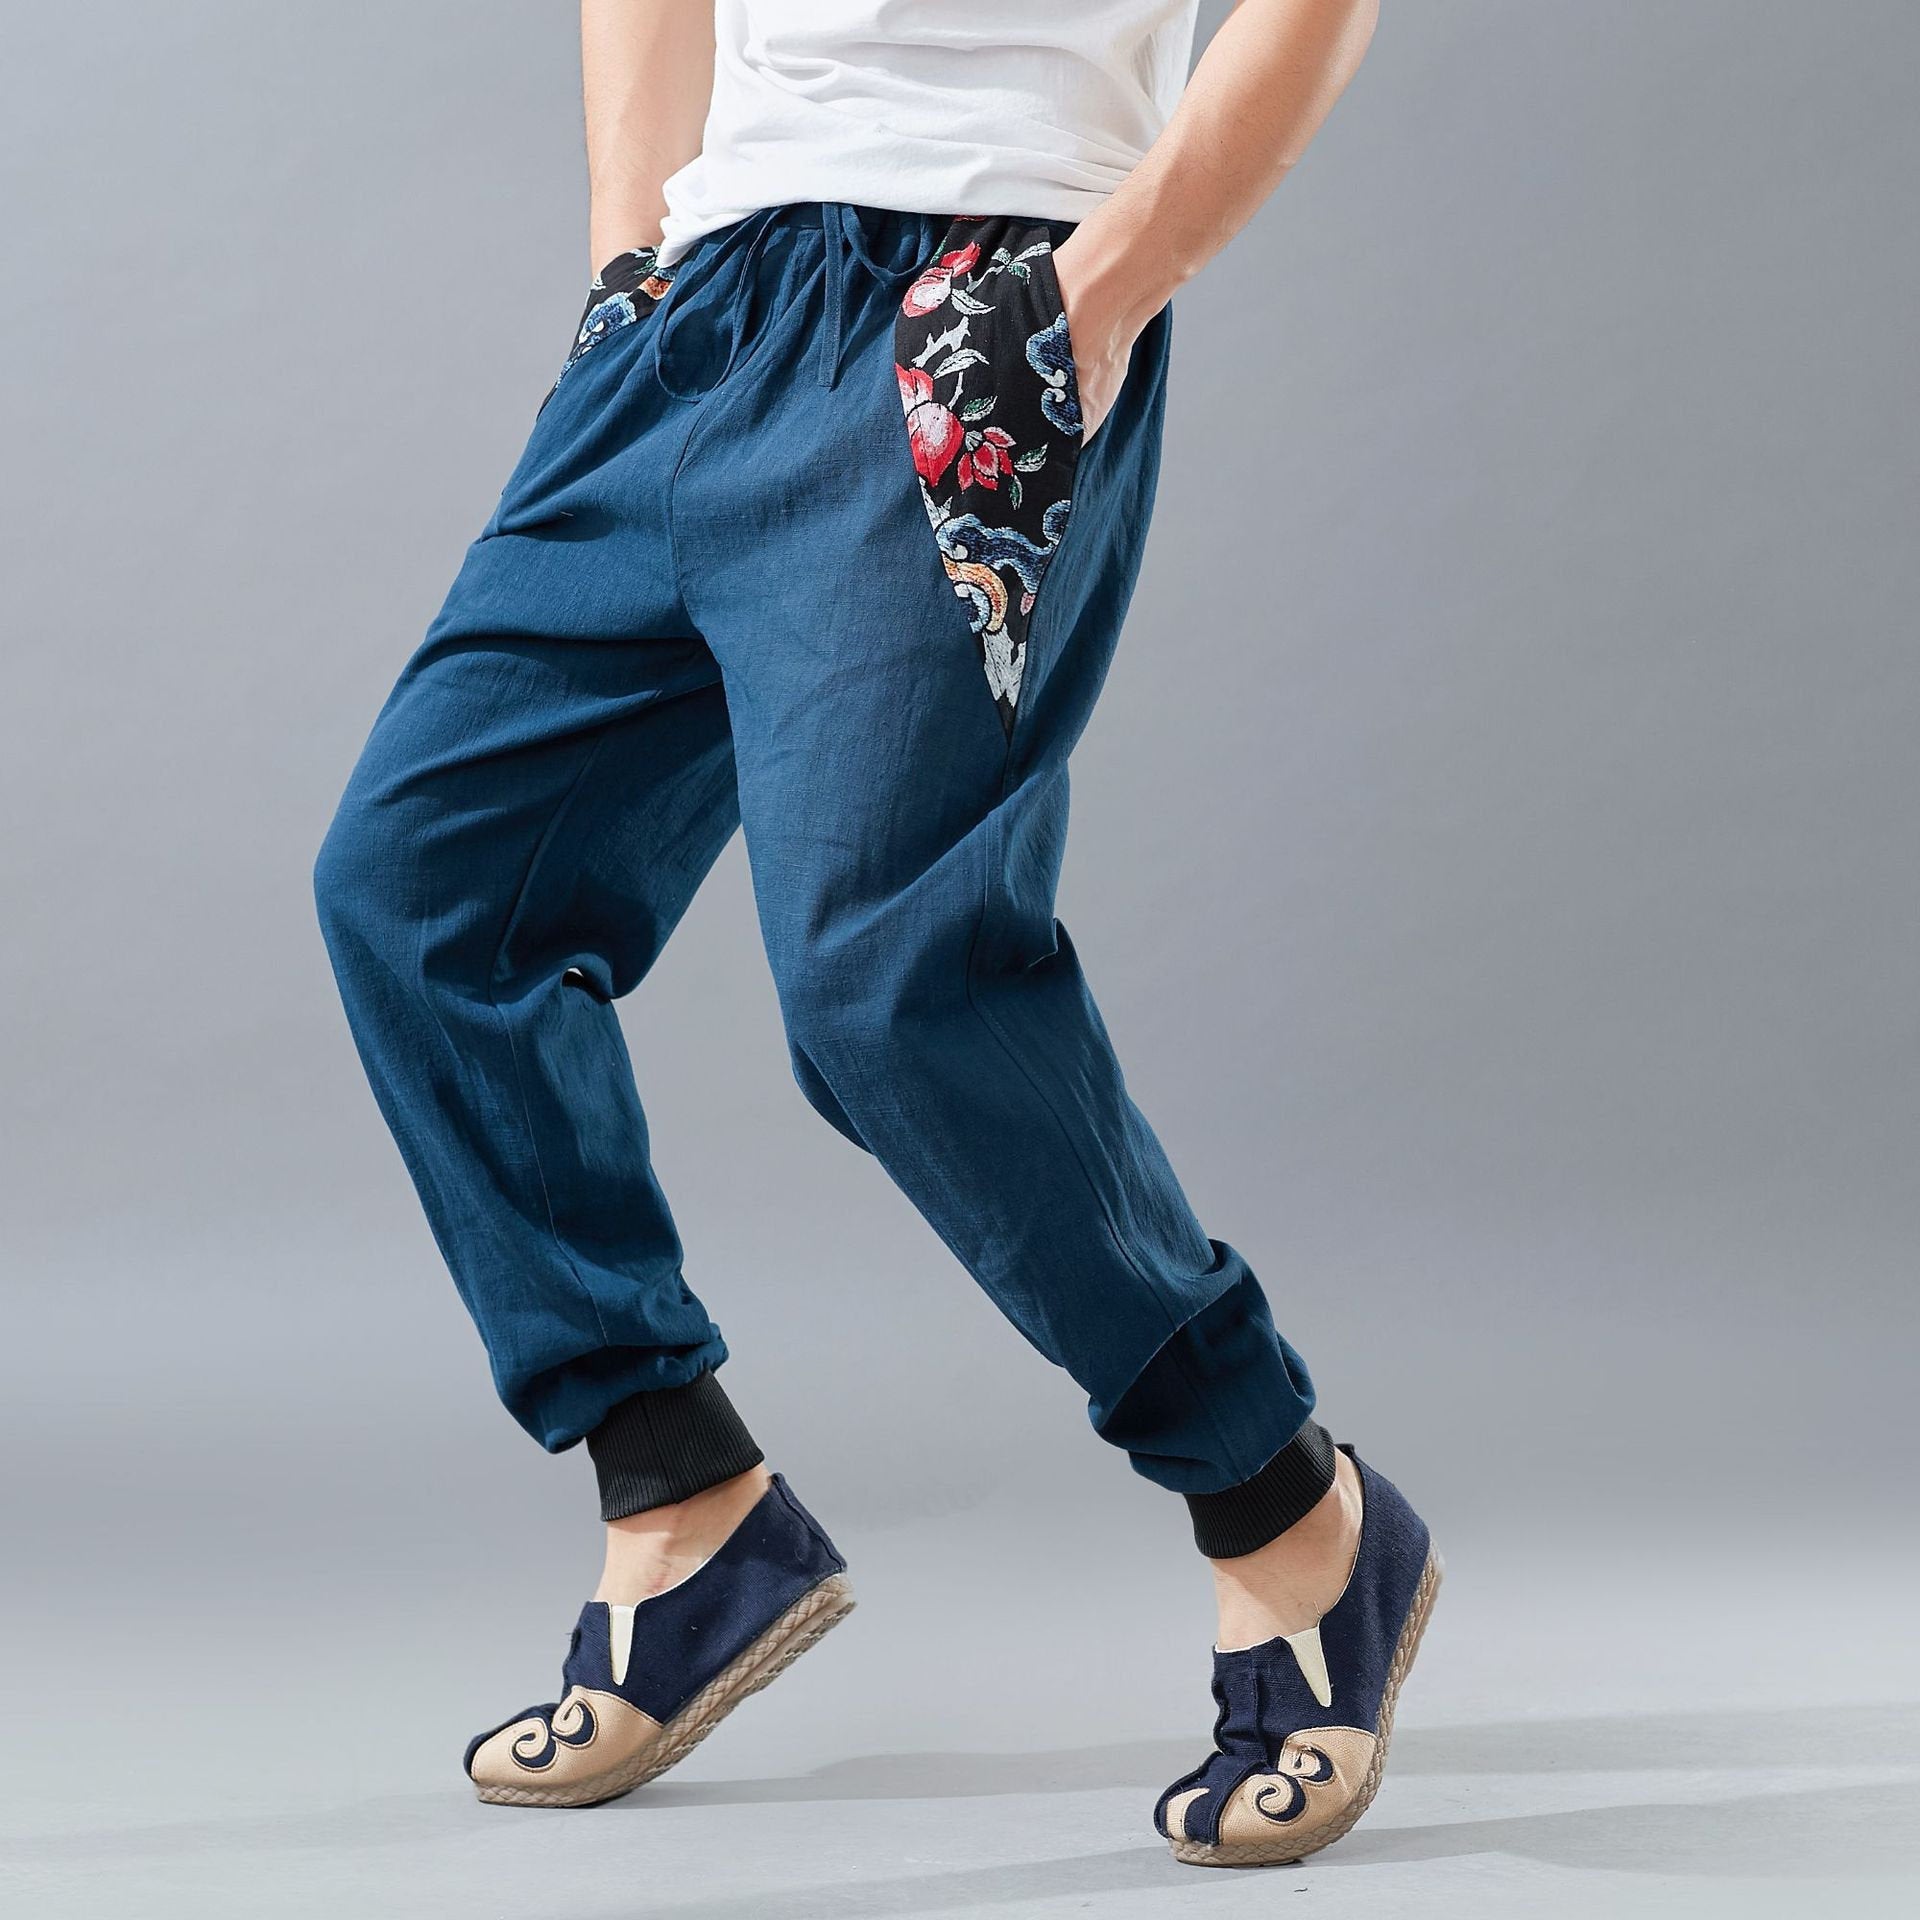 Chino trousers for men: Best-selling chino trousers for men under Rs.700 -  The Economic Times